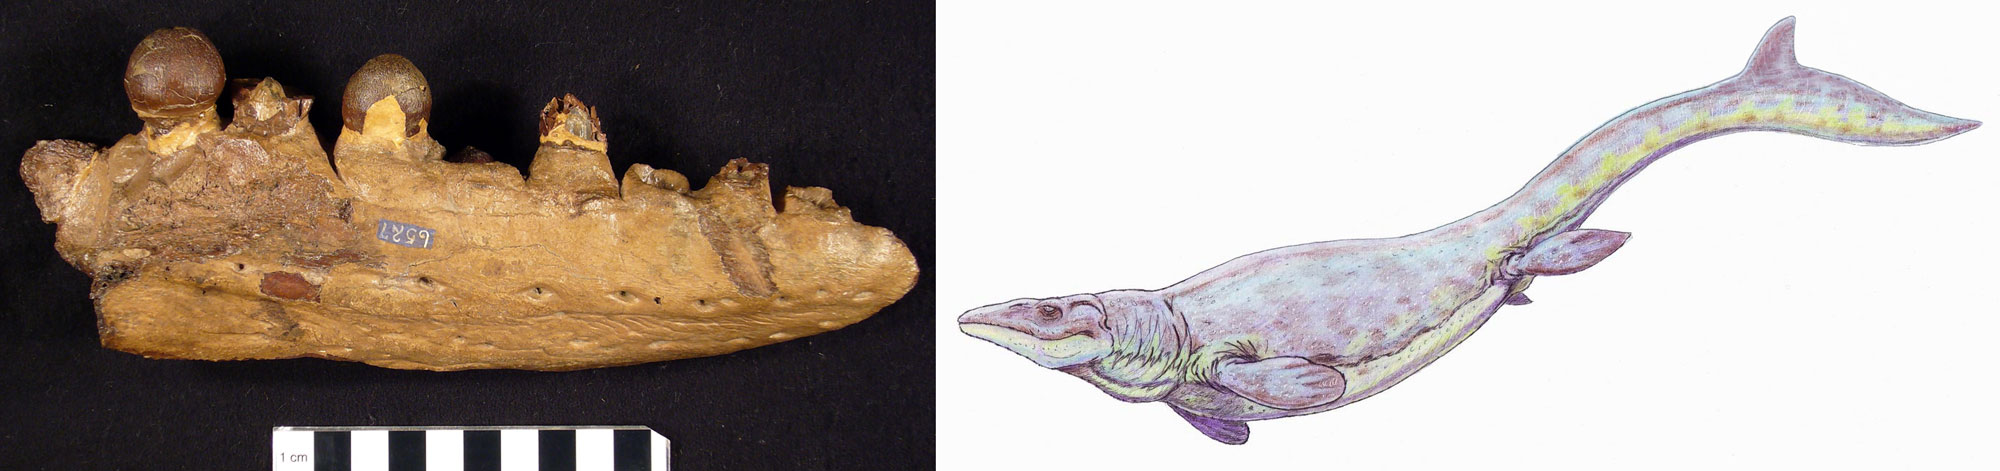 2-Panel figure showing a mollusk-eating mosasaur, a type of elongated aquatic reptile. Panel 1: Photo of part of lower jaw showing rounded teeth. Panel 2: Reconstruction of the living animal showing that it had an elongated body, four flippers, and an asymmetrical tail with the fins oriented vertically.